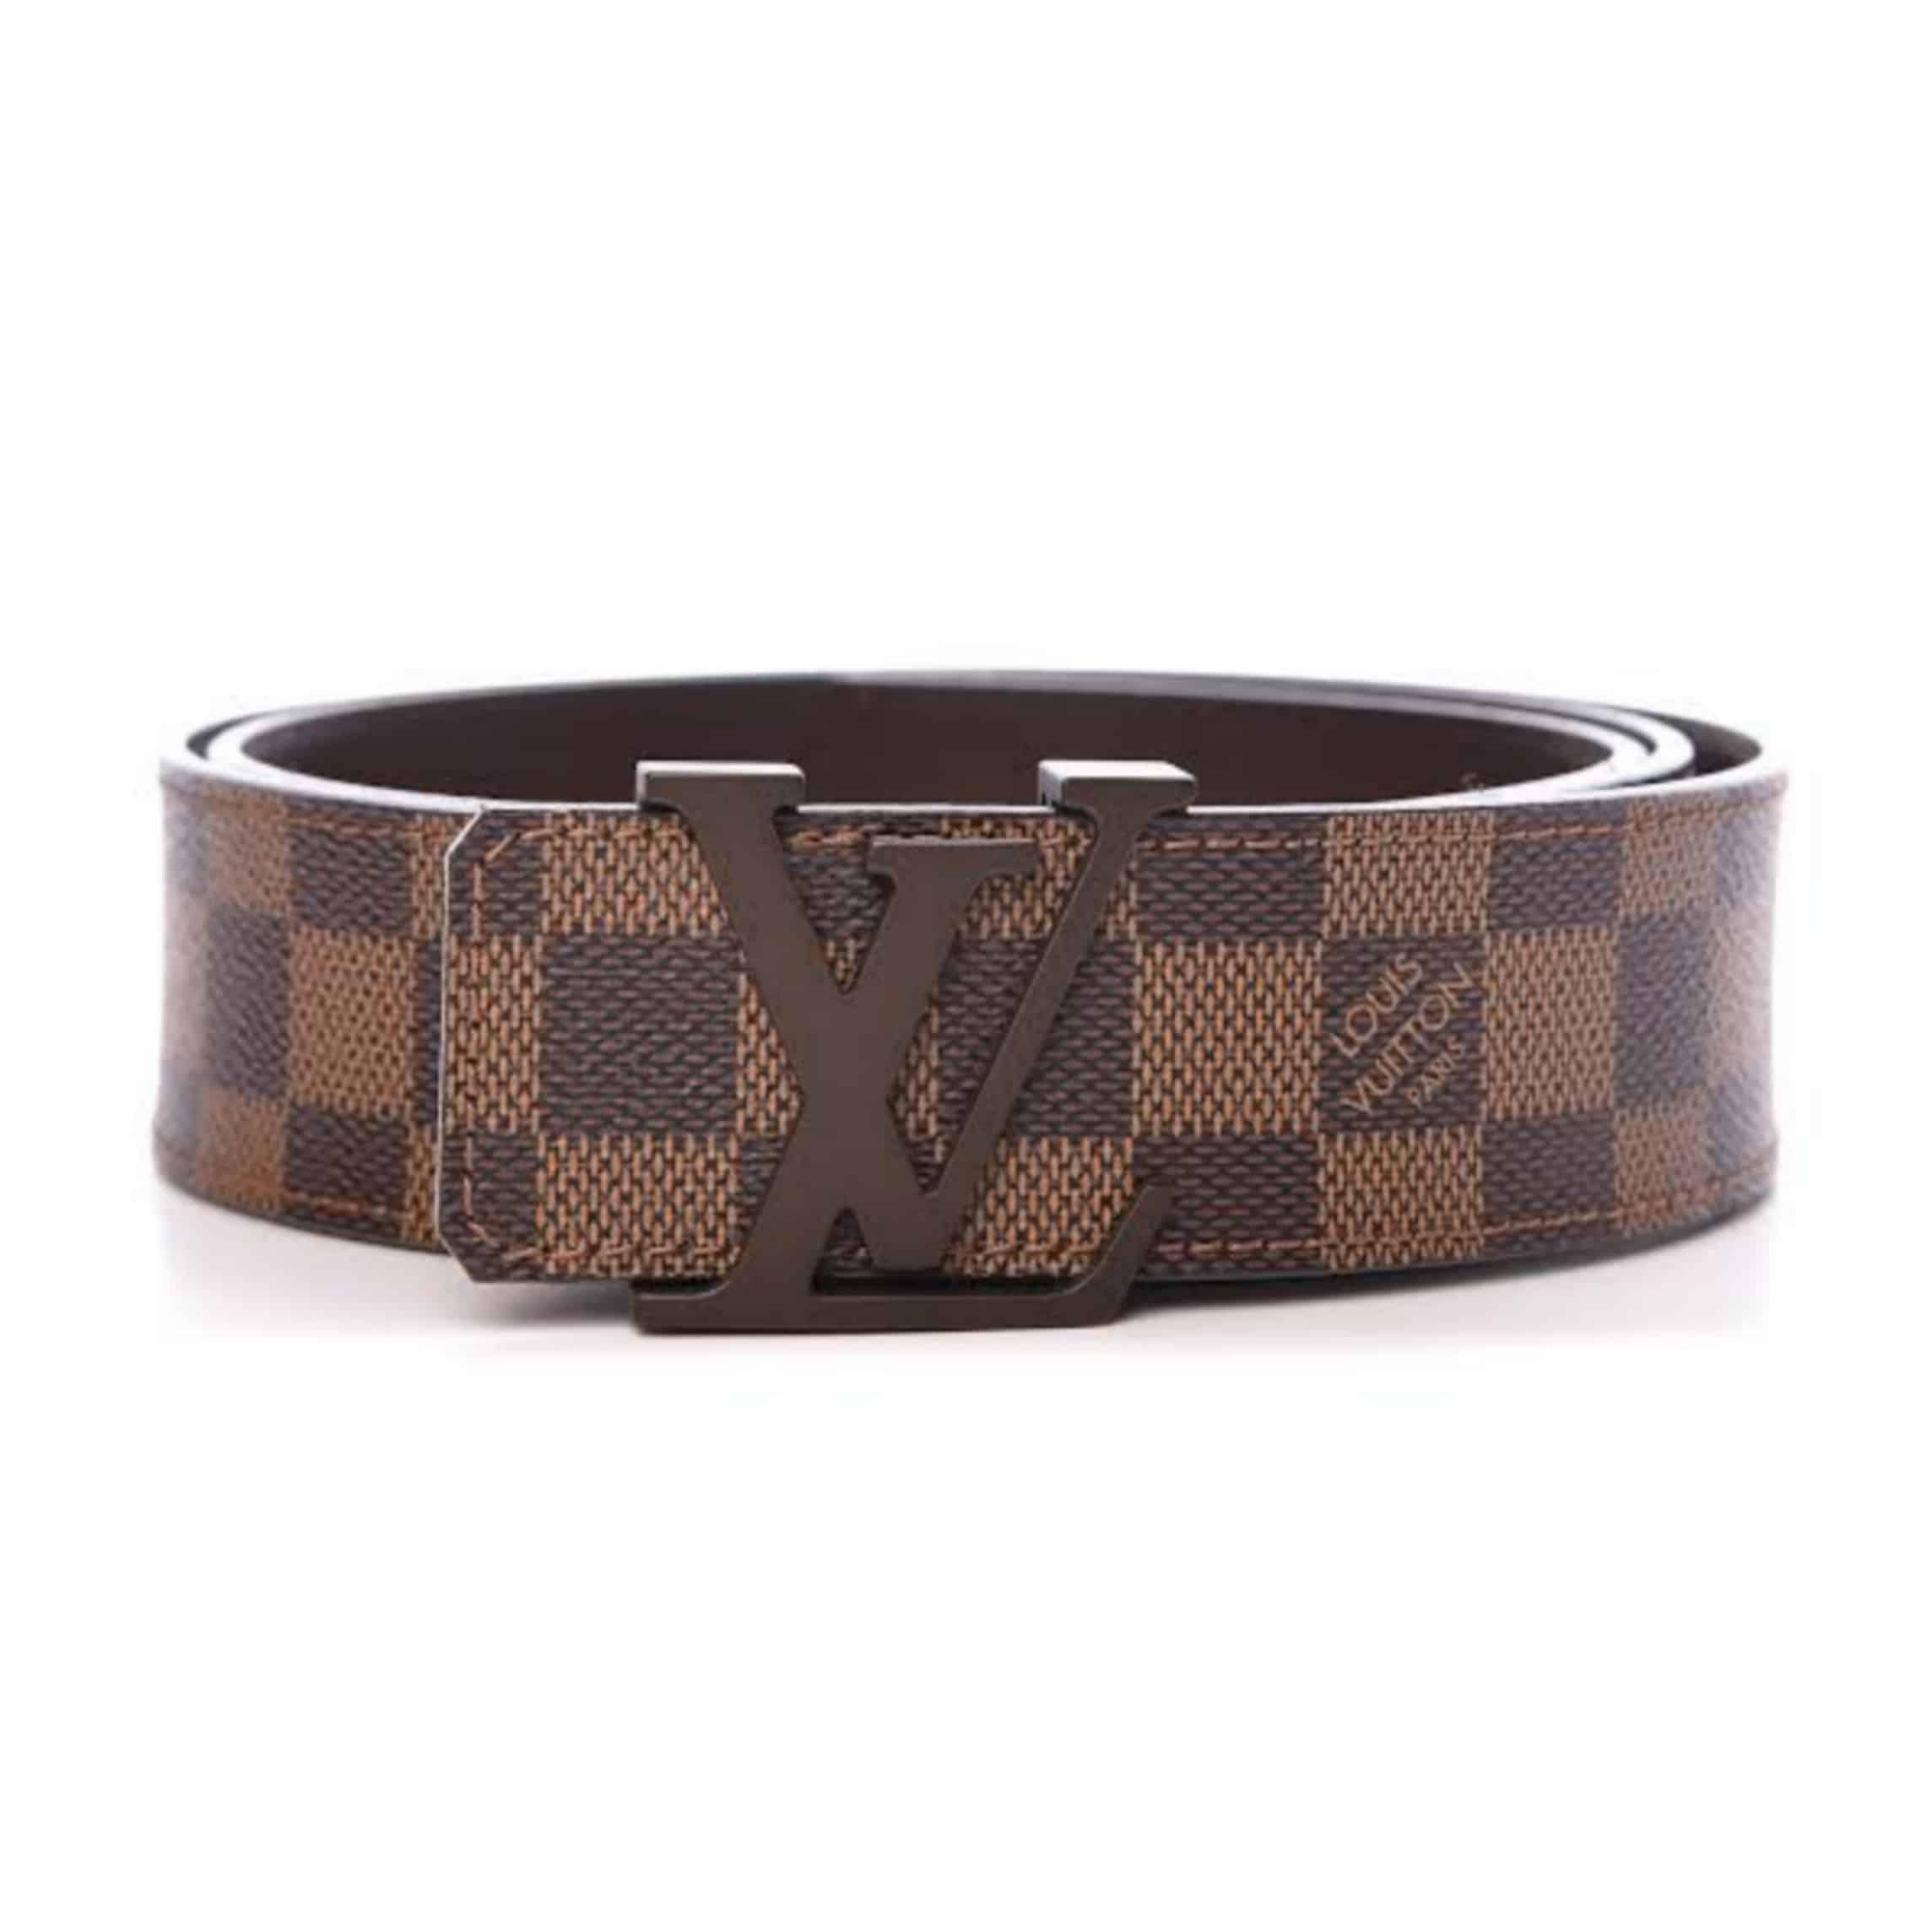 GUCCI INTERLOCKING G-BUCKLE LEATHER BELT - B3 - REPGOD.ORG/IS - Trusted ...